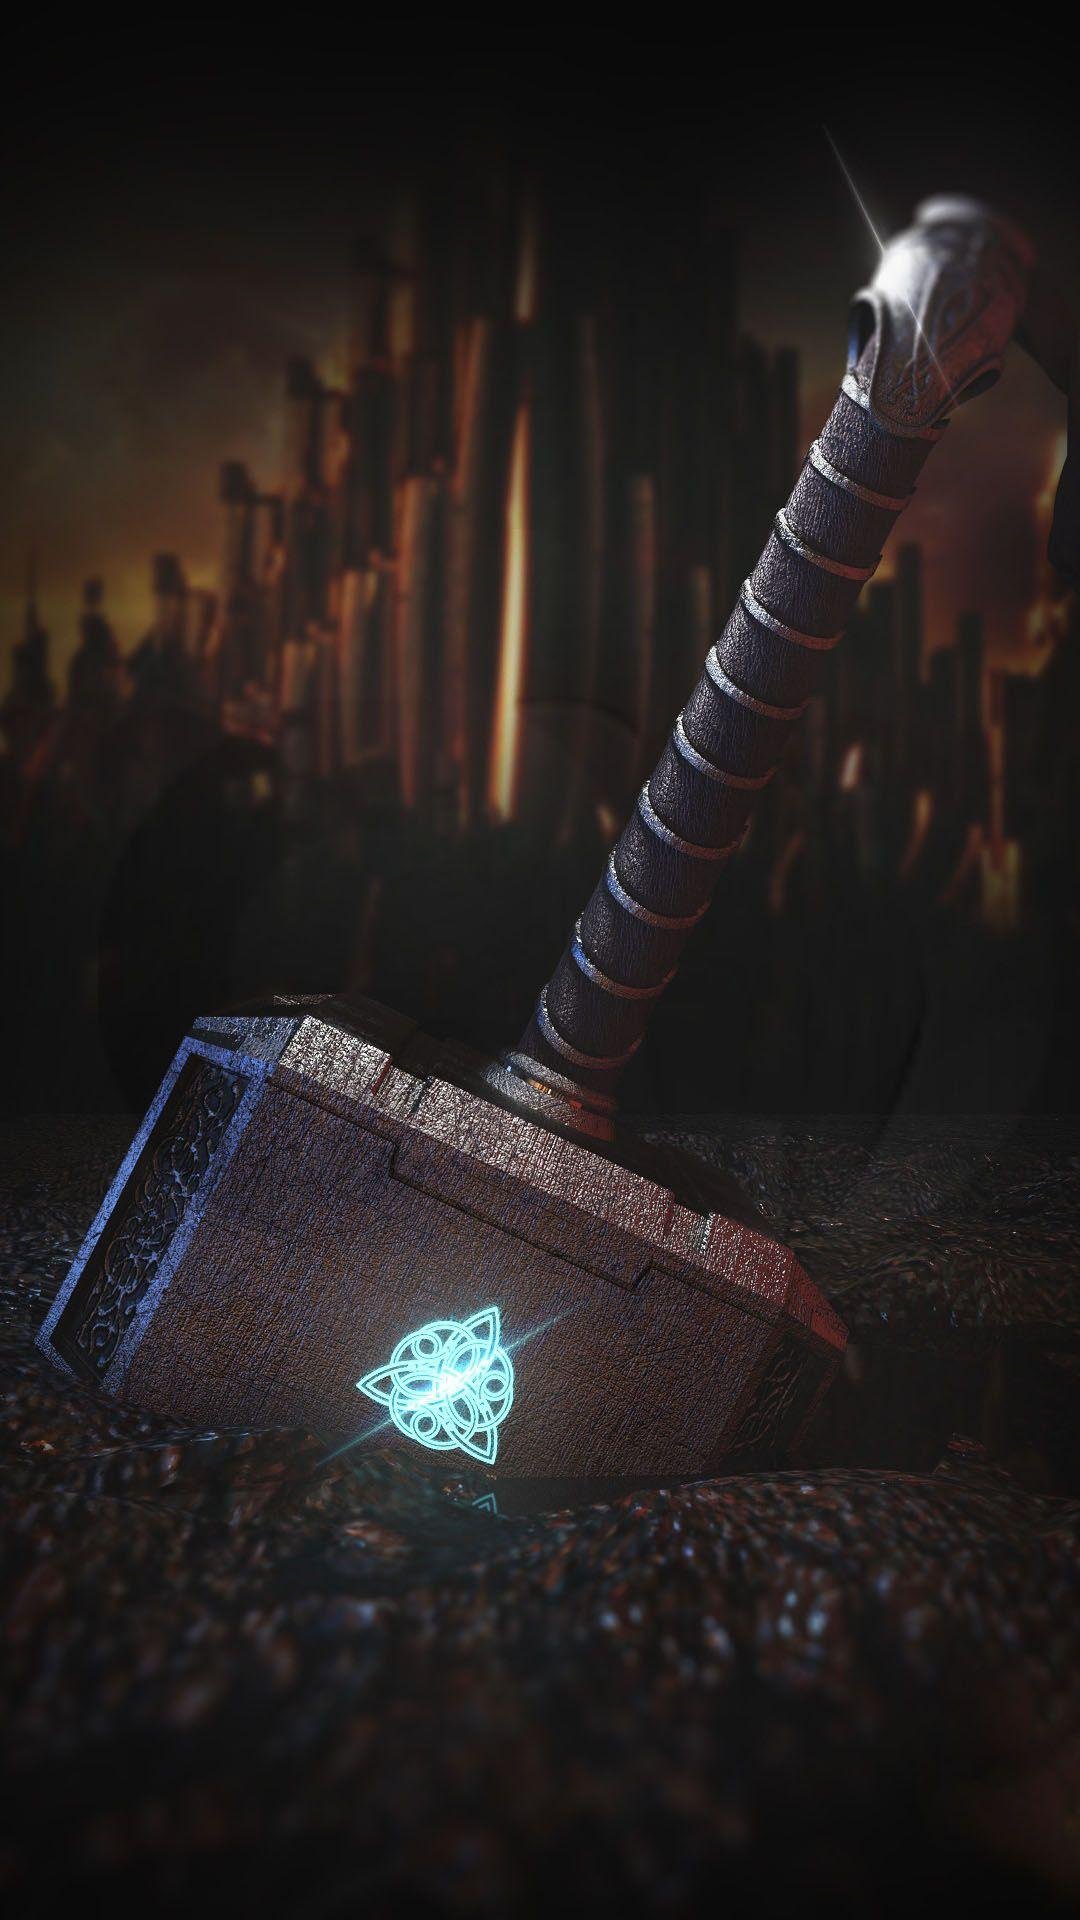 Thor Mjolnir IPhone Wallpaper  IPhone Wallpapers  iPhone Wallpapers